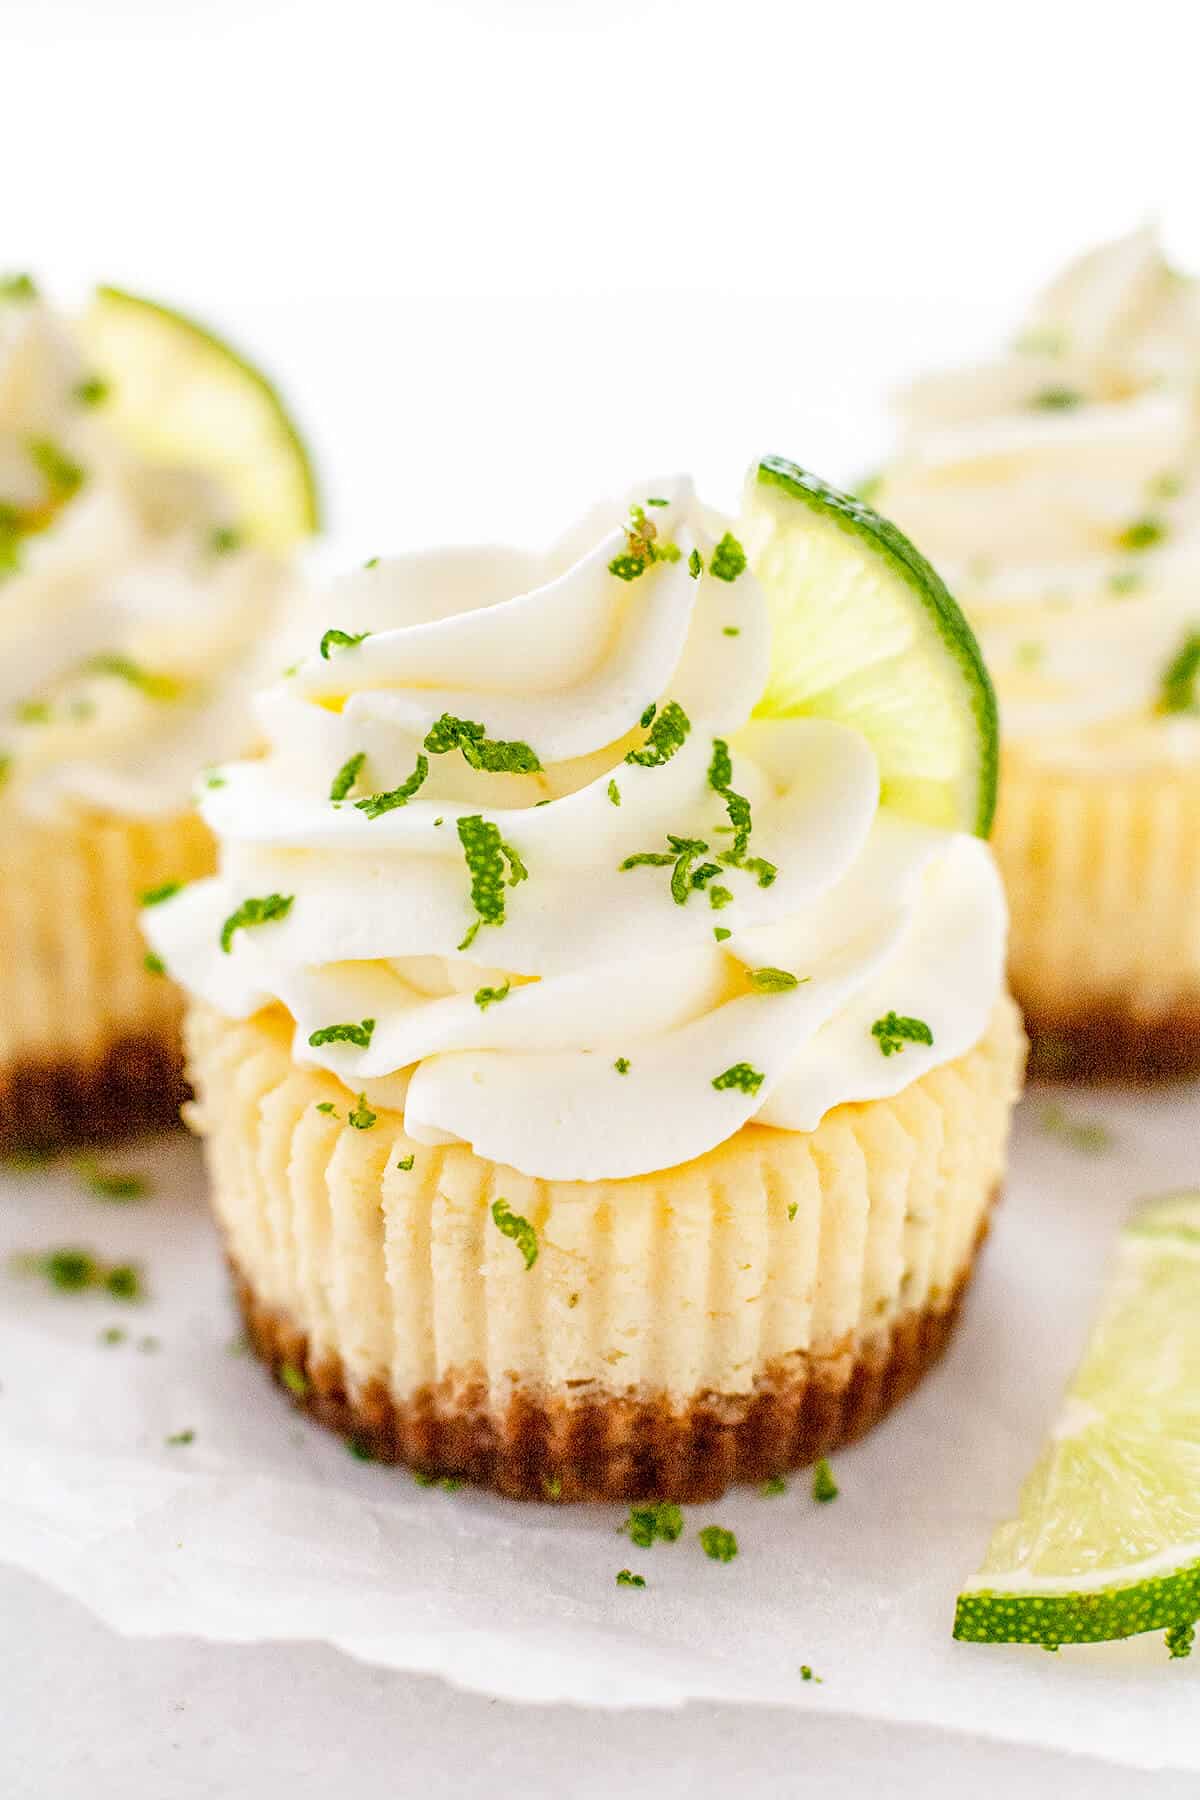 How to Bake Eggs in a Muffin Tin in the Oven - Key To My Lime